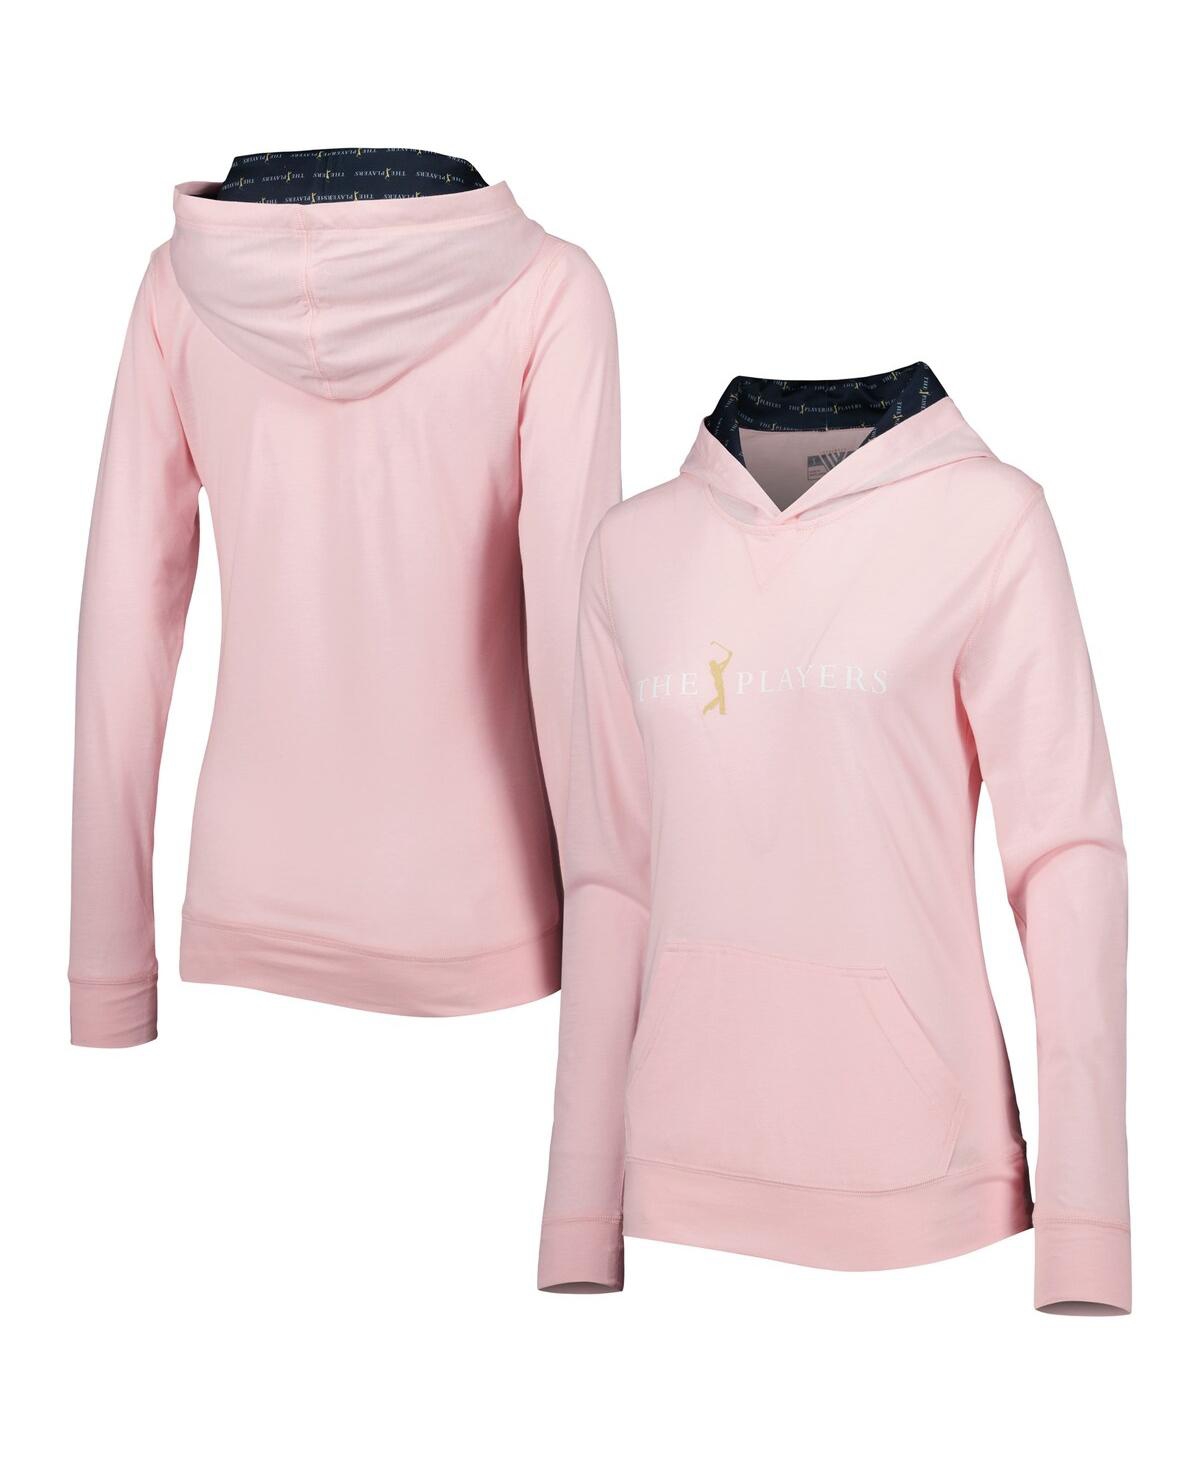 Women's LevelWear Pink The Players Recovery Pullover Hoodie - Pink